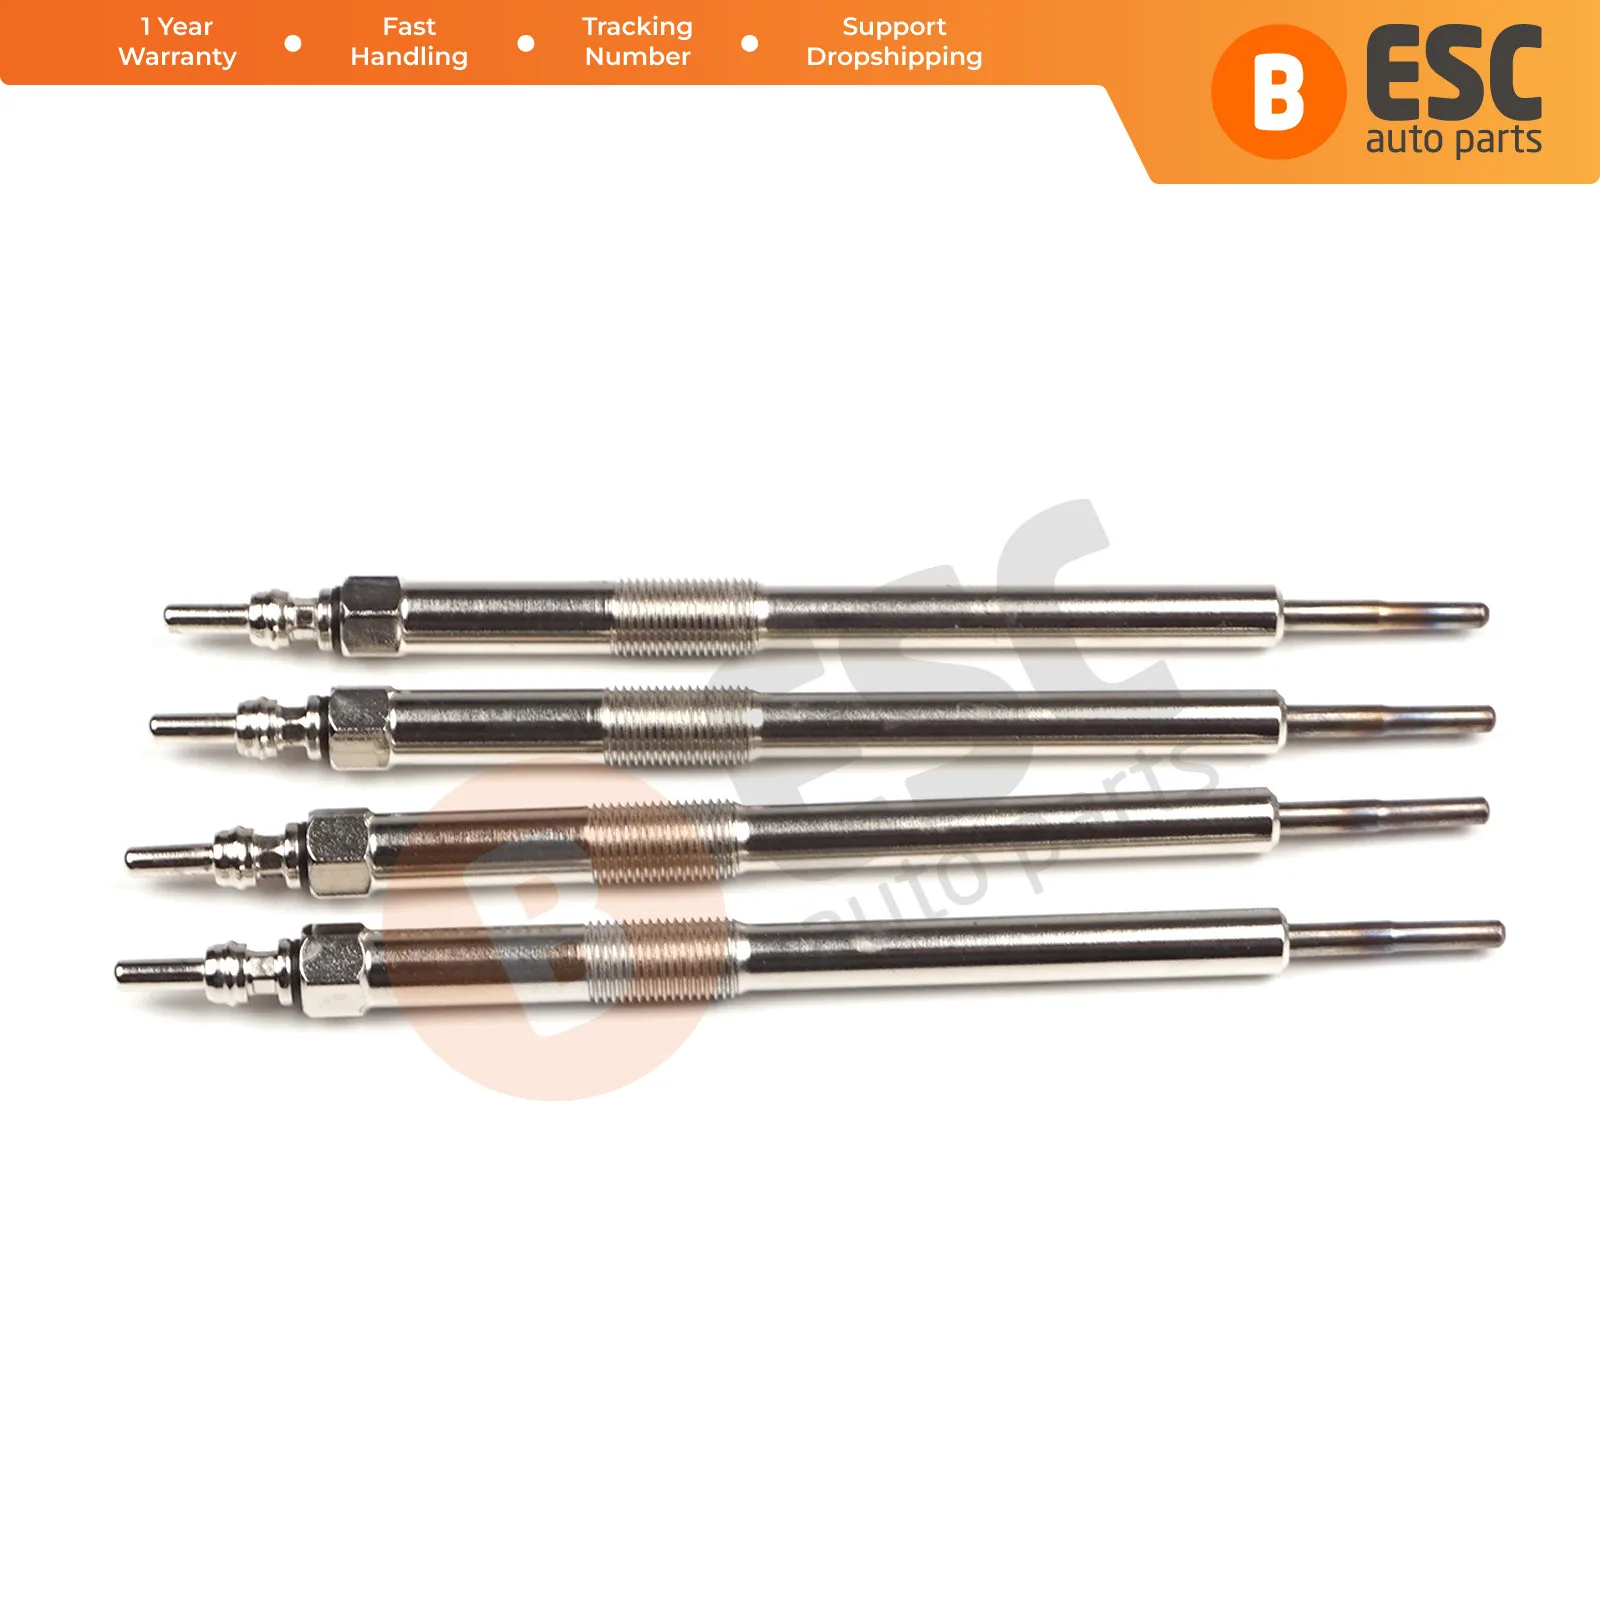 Egp11-1 4 Pcs Heater Glow Plugs Gx3164, 0 250 603 001 For Vauxhall Opel Nissan Renault Ship From Turkey